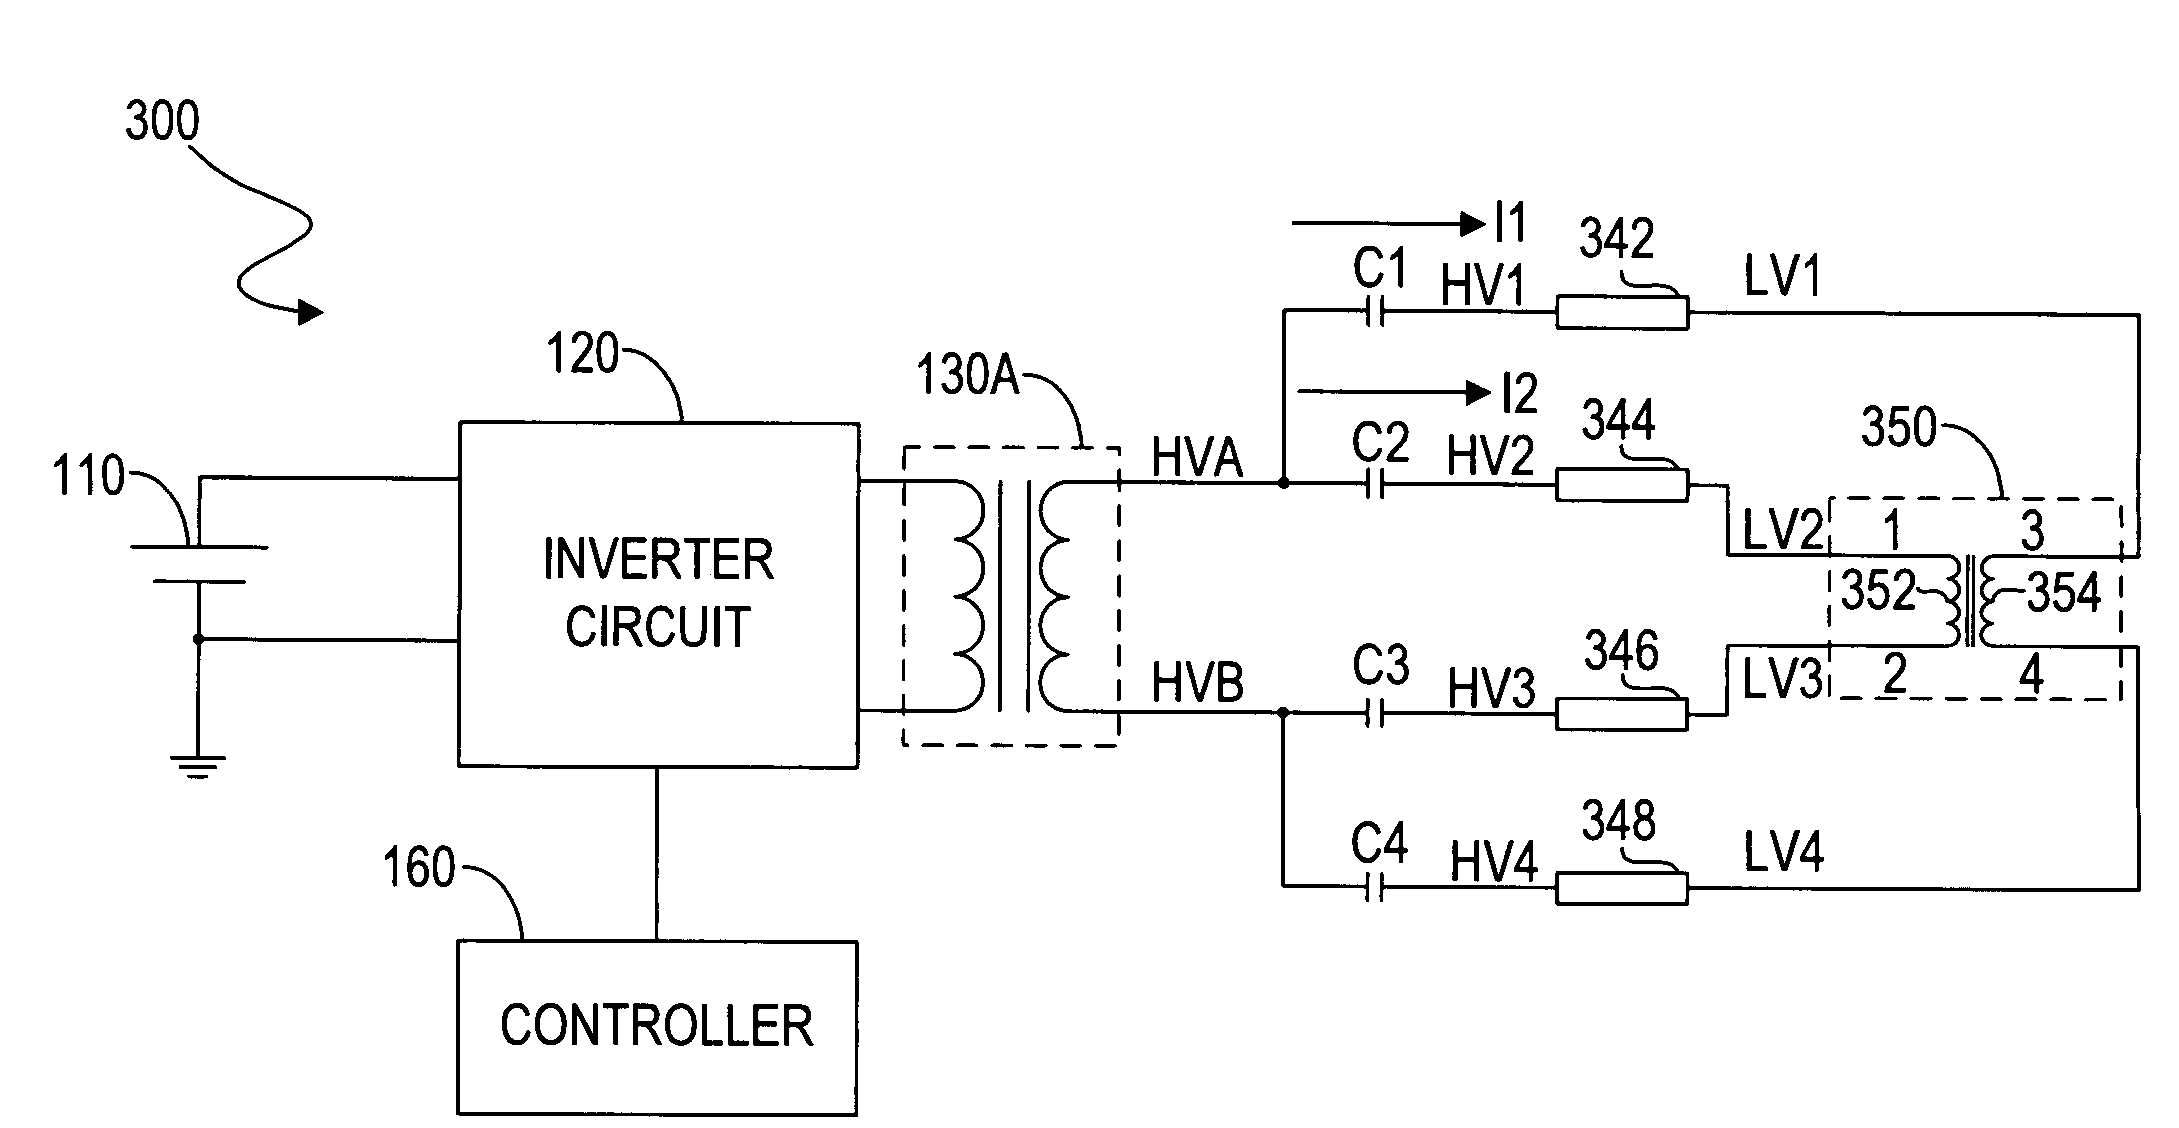 Circuit structure for LCD backlight